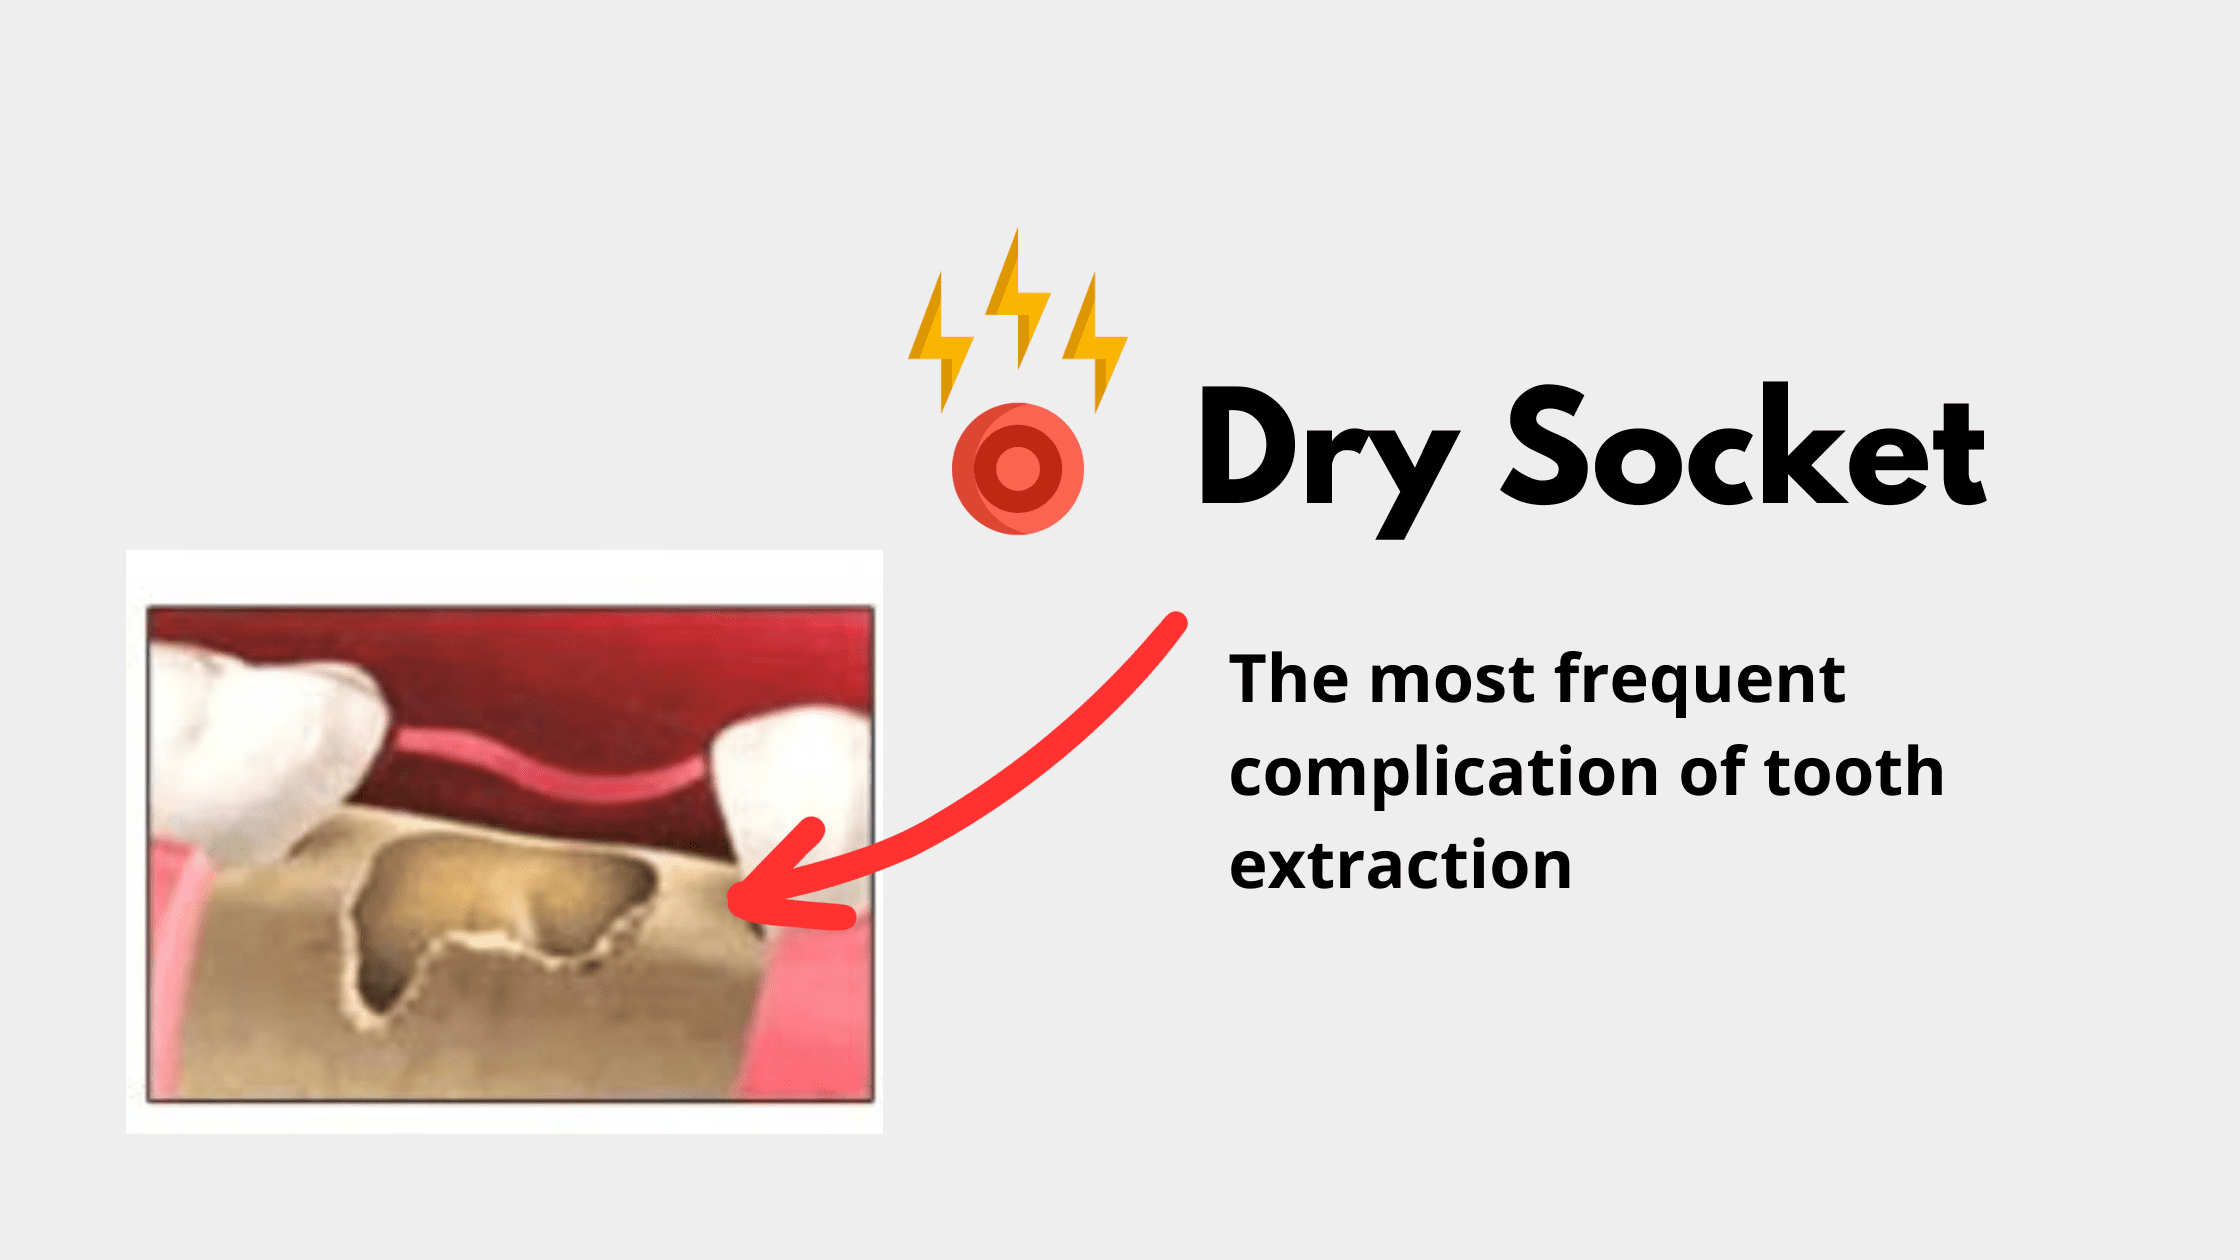 Dry socket: The Most Common Complication After Tooth Extraction